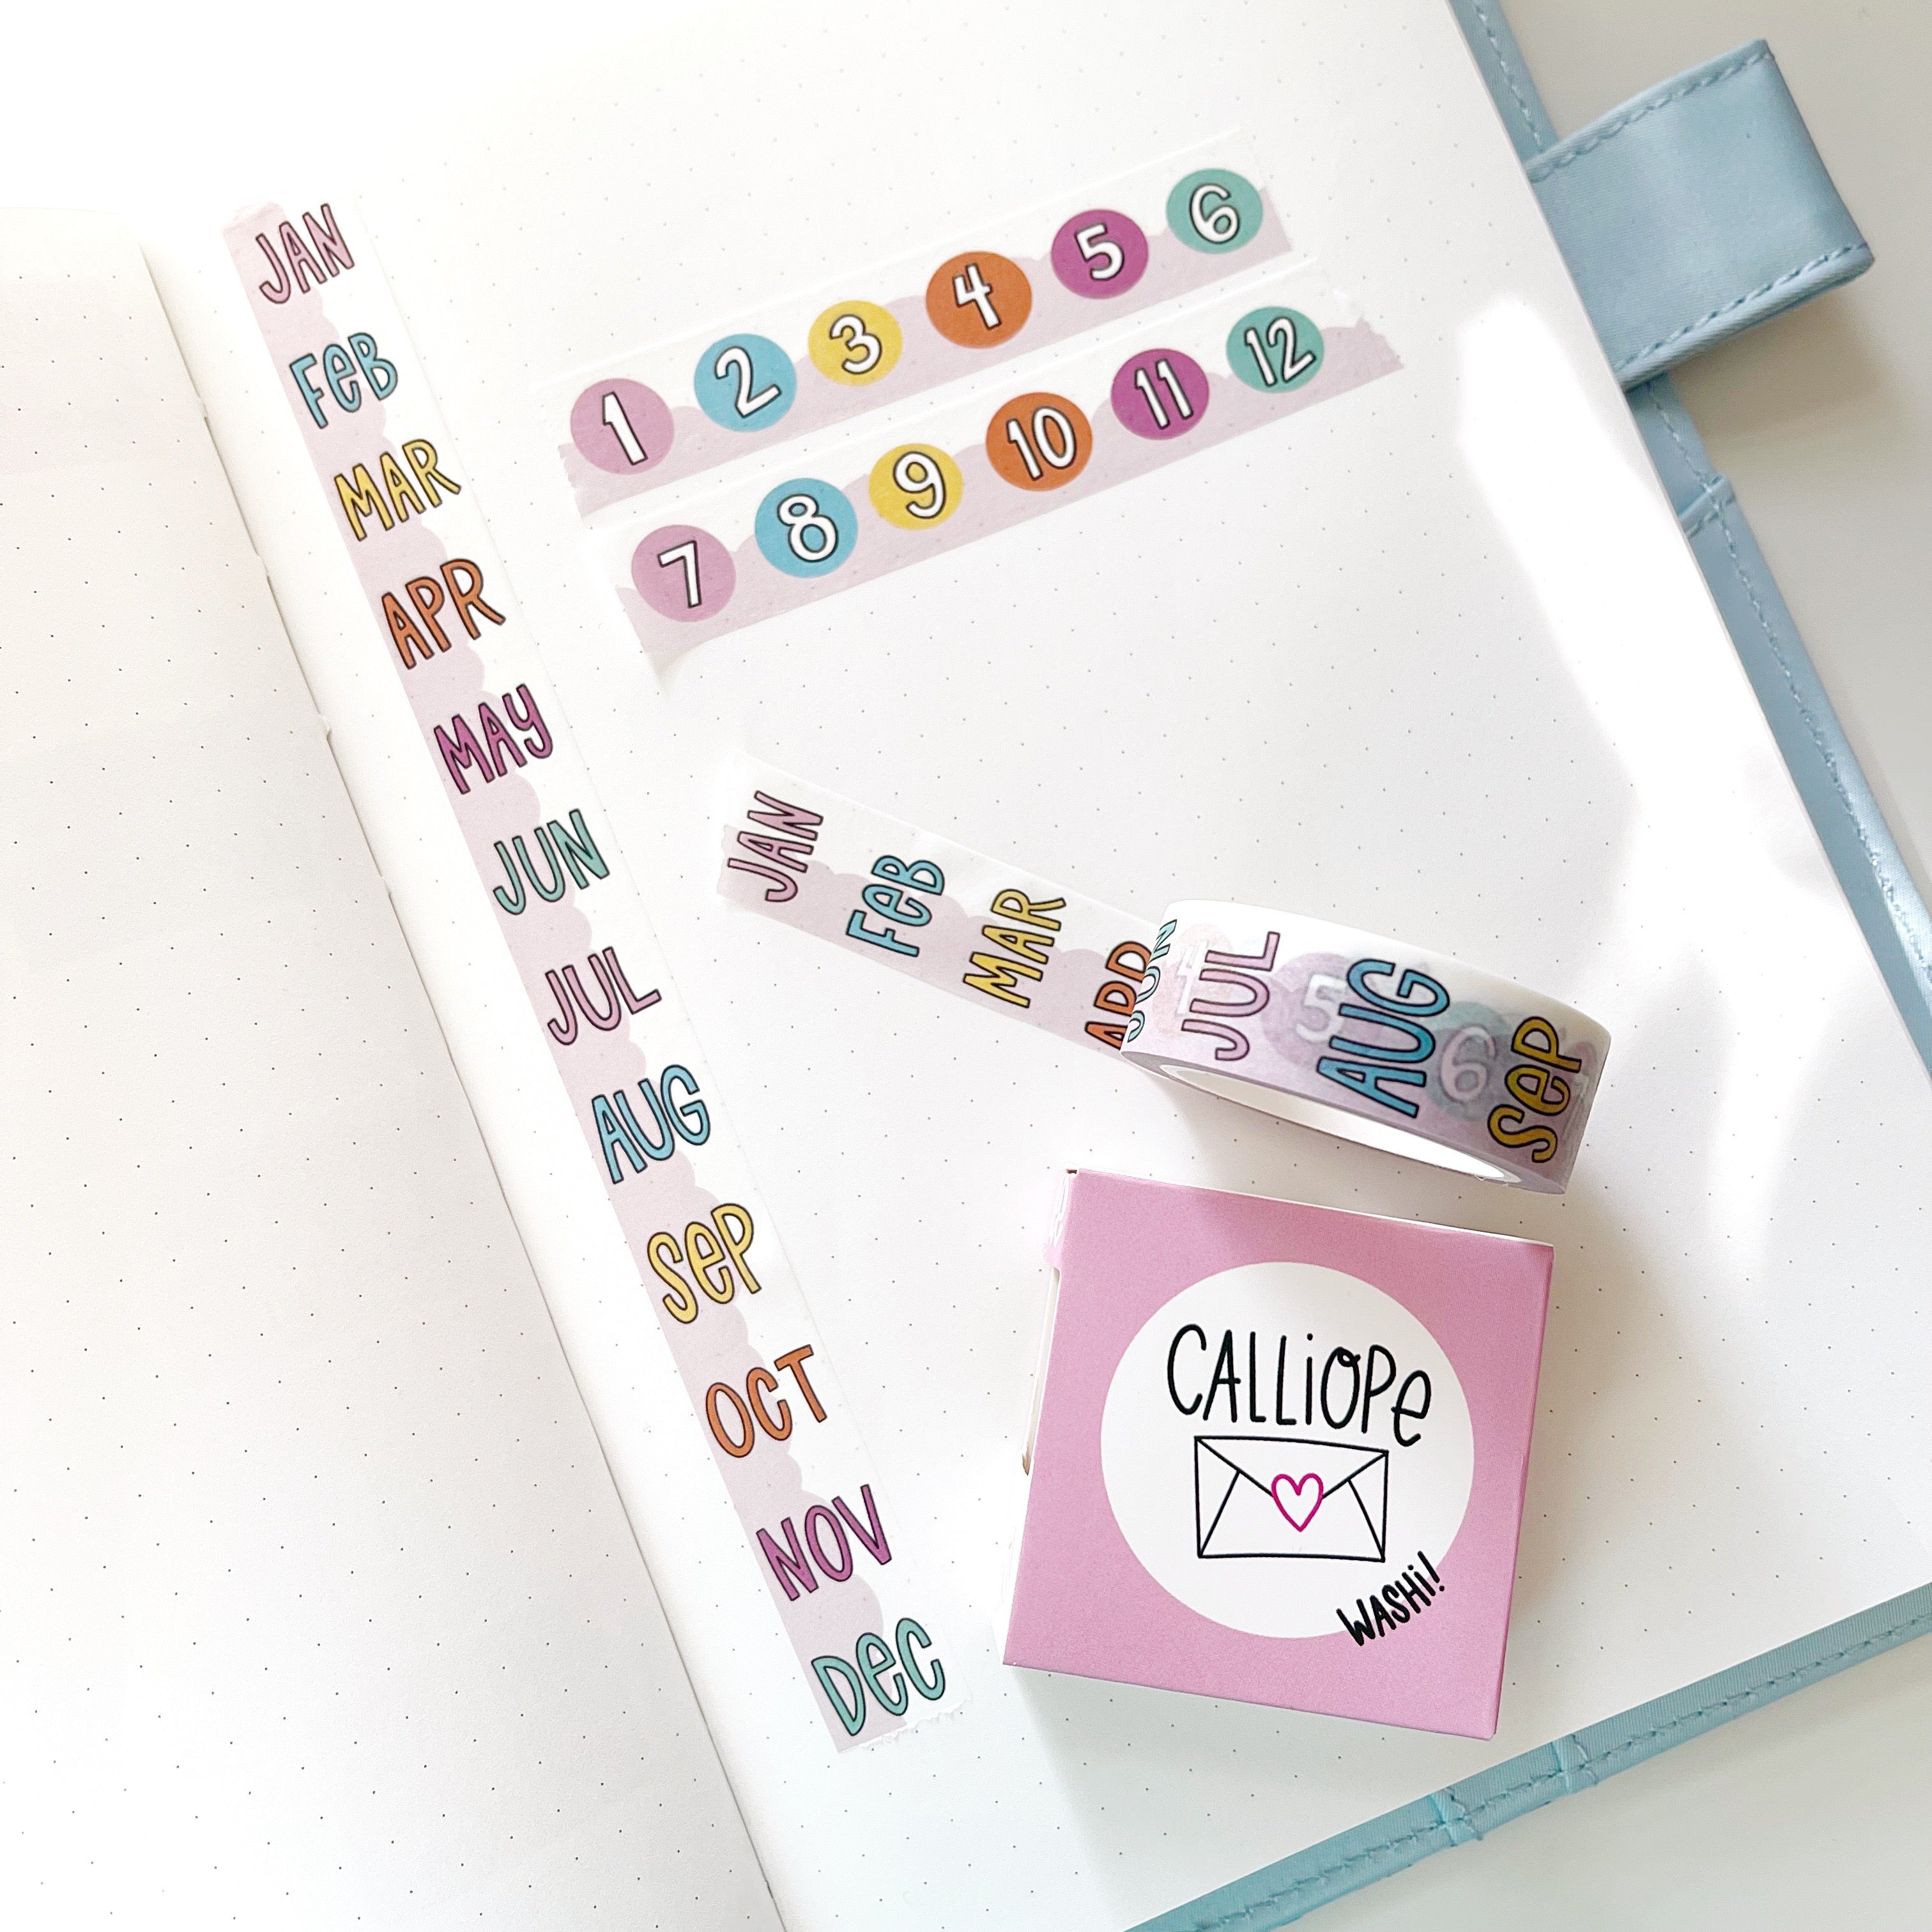 Months of The Year Washi Tape